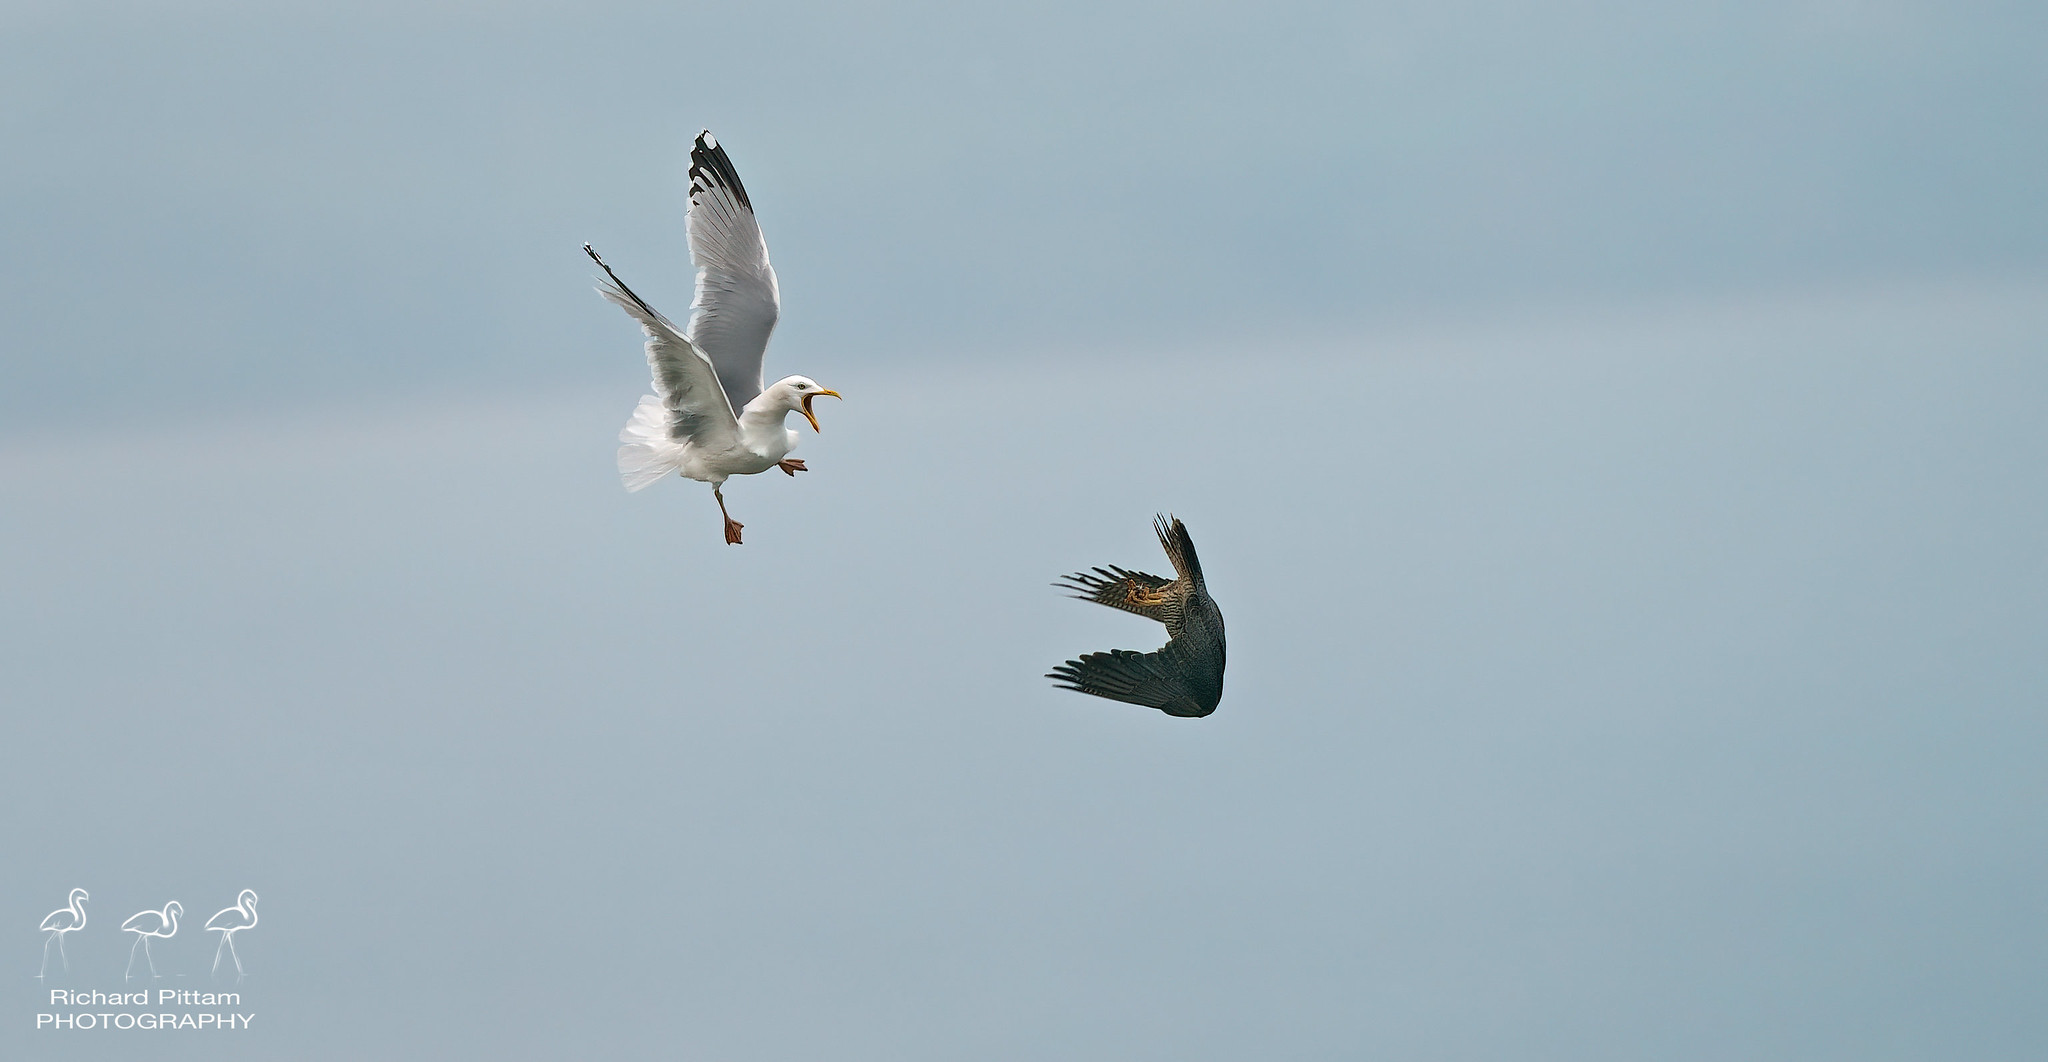 Peregrine and Herring Gull in aerial tussle on cliffs